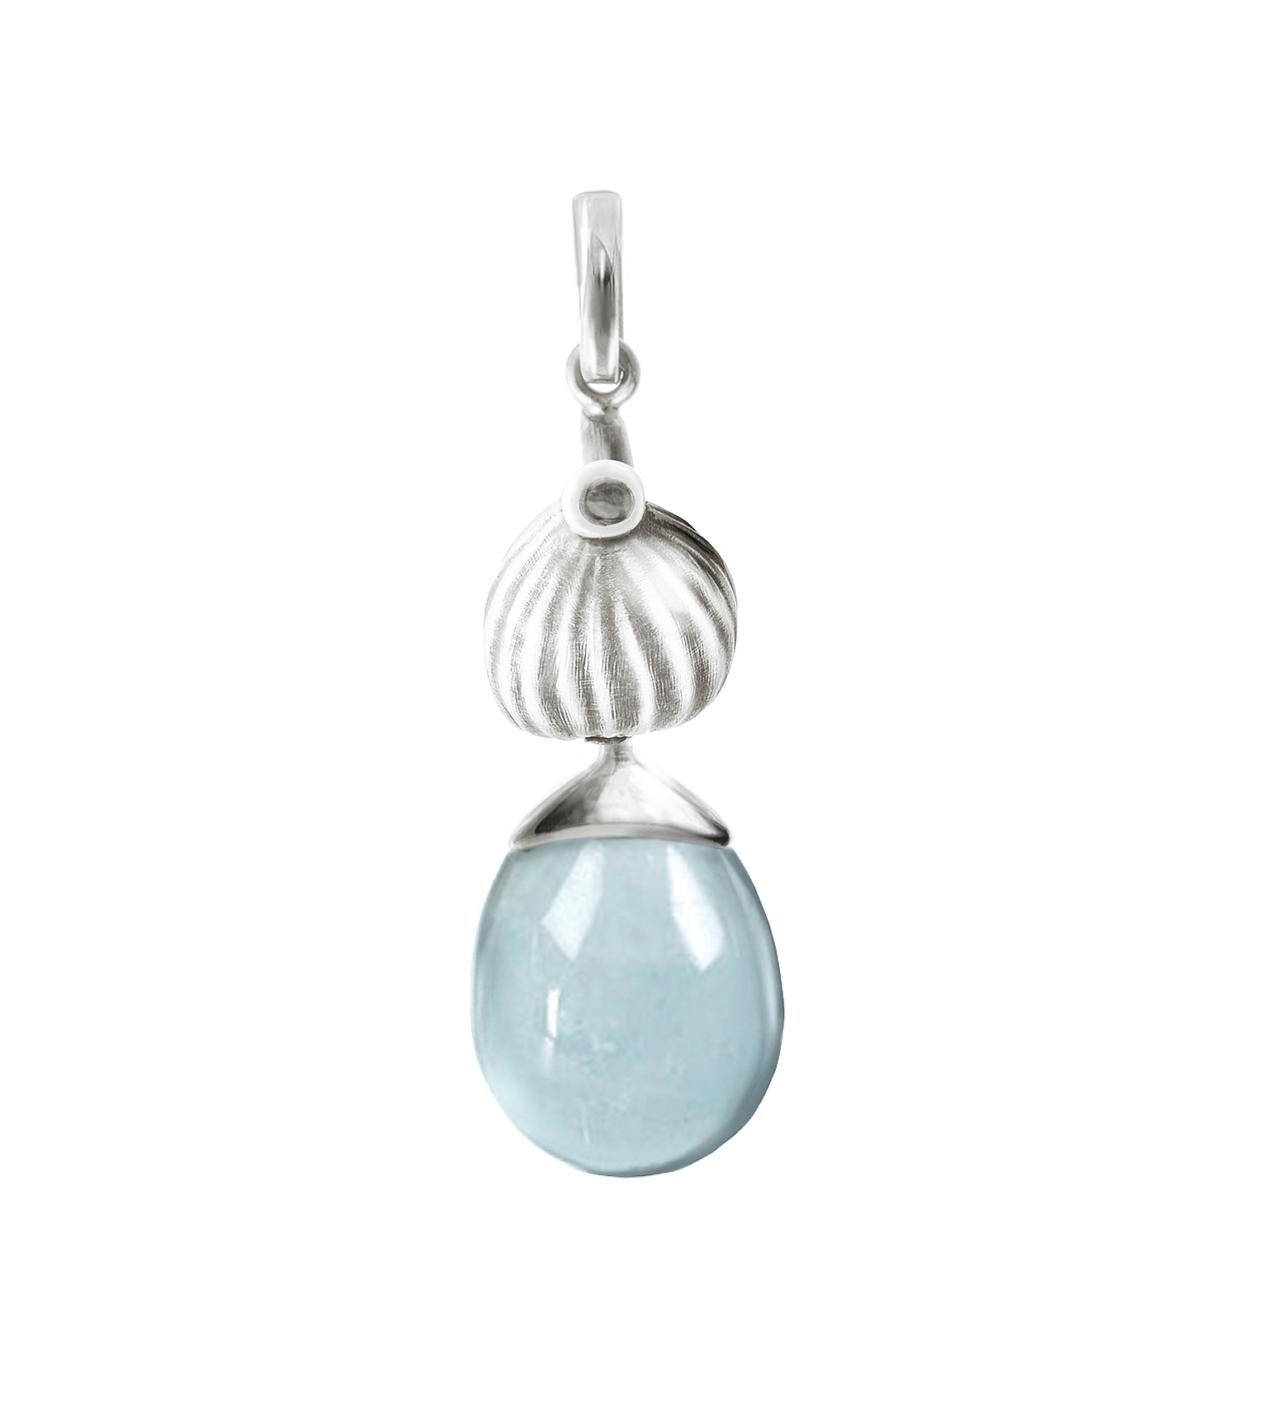 The Fig drop pendant necklace is made of 14 karat white gold with a detachable cabochon natural topaz. The gem drop is designed to allow light to pass through it, creating a beautiful and unique effect. This collection was featured in Vogue UA.

The